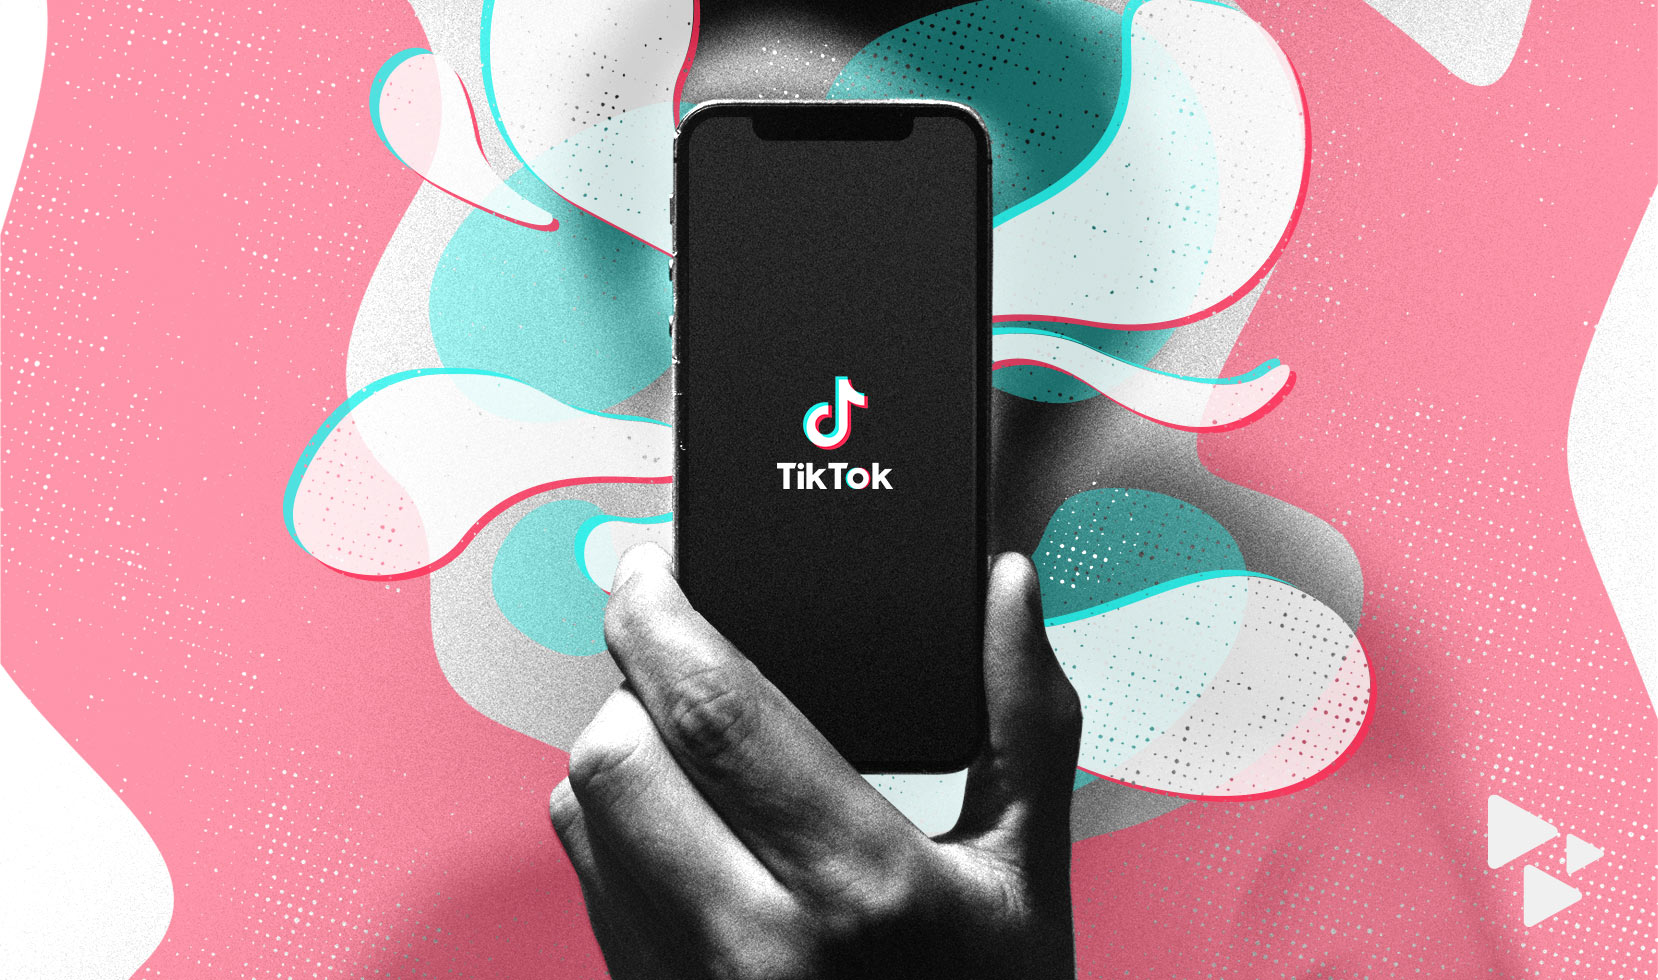 How to grow your audience on TikTok as a musician